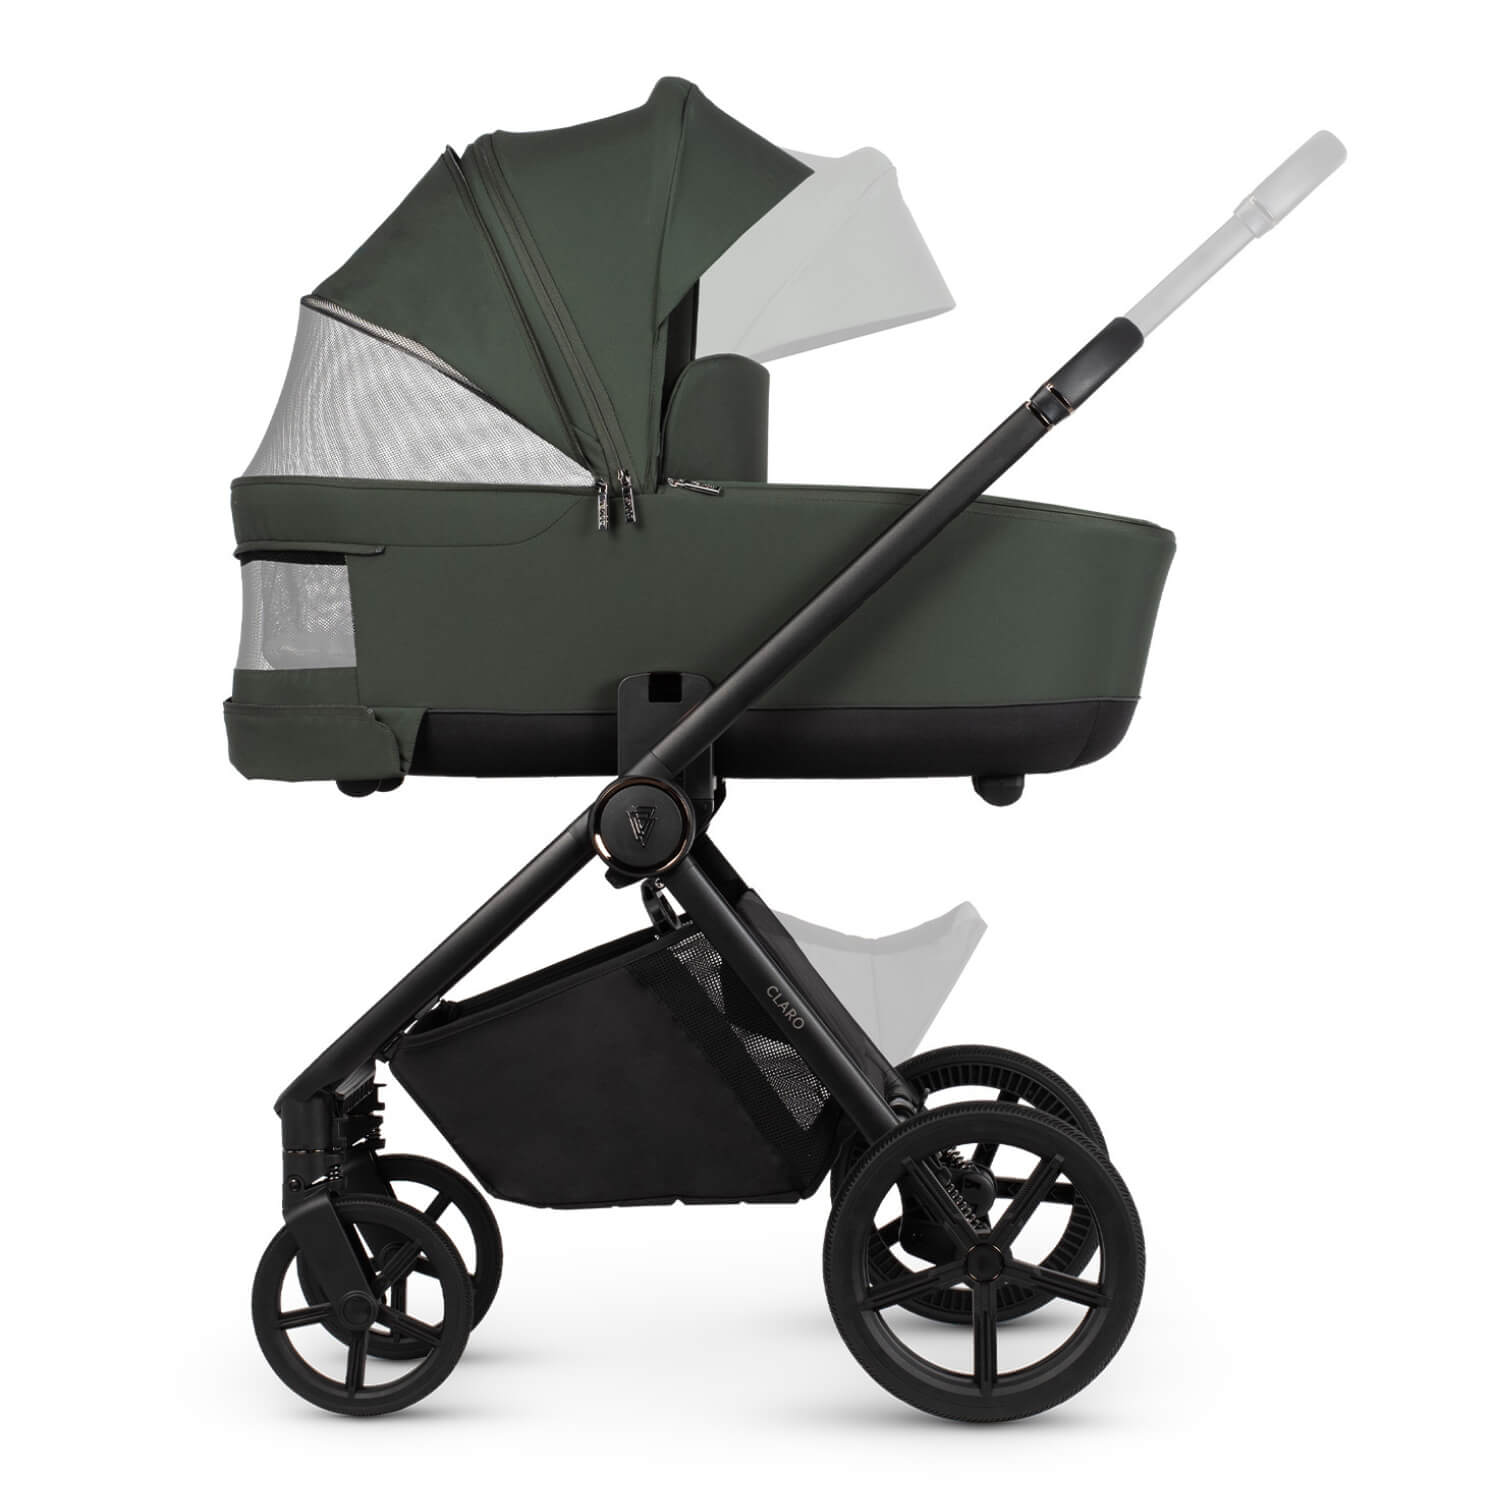 Venicci Claro carrycot in Forest with the panoramic ventilation opened